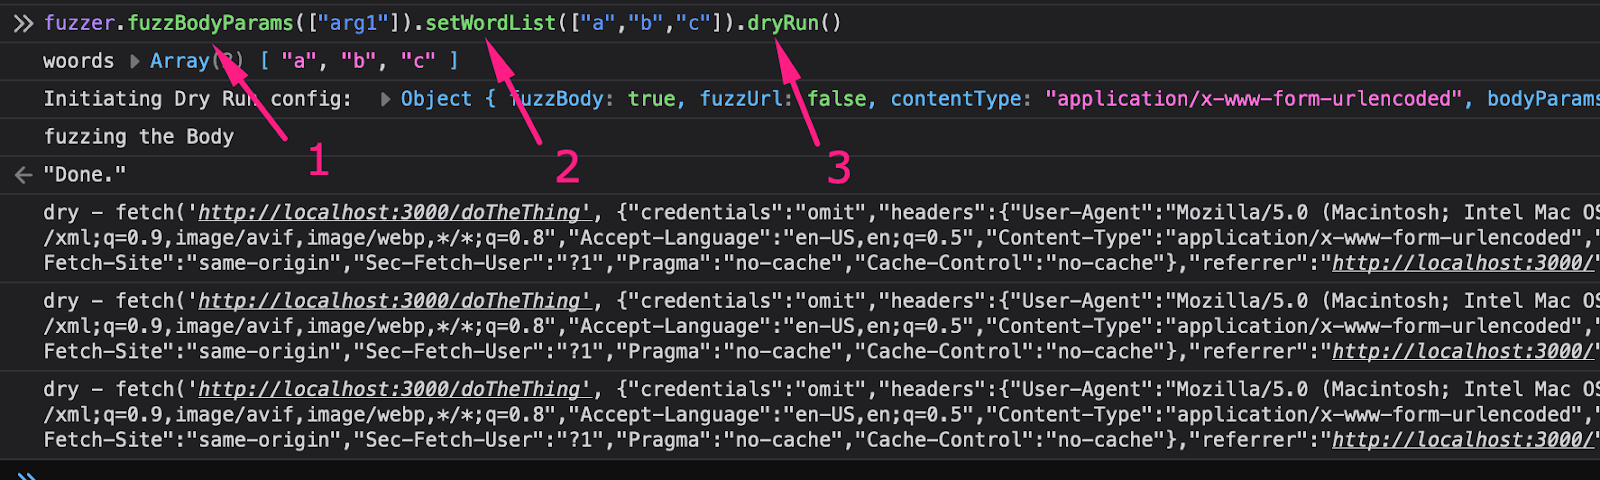 The JavaScript console shows the chaining of functions, numbered 1, 2, and 3. The full command is fuzzer.fuzzBodyParams(["arg1"]).setWordList(["a","b","c"]).dryRun(). The numbering identifies fuzzBodyParams, setWordList, and dryRun as the three chained functions.